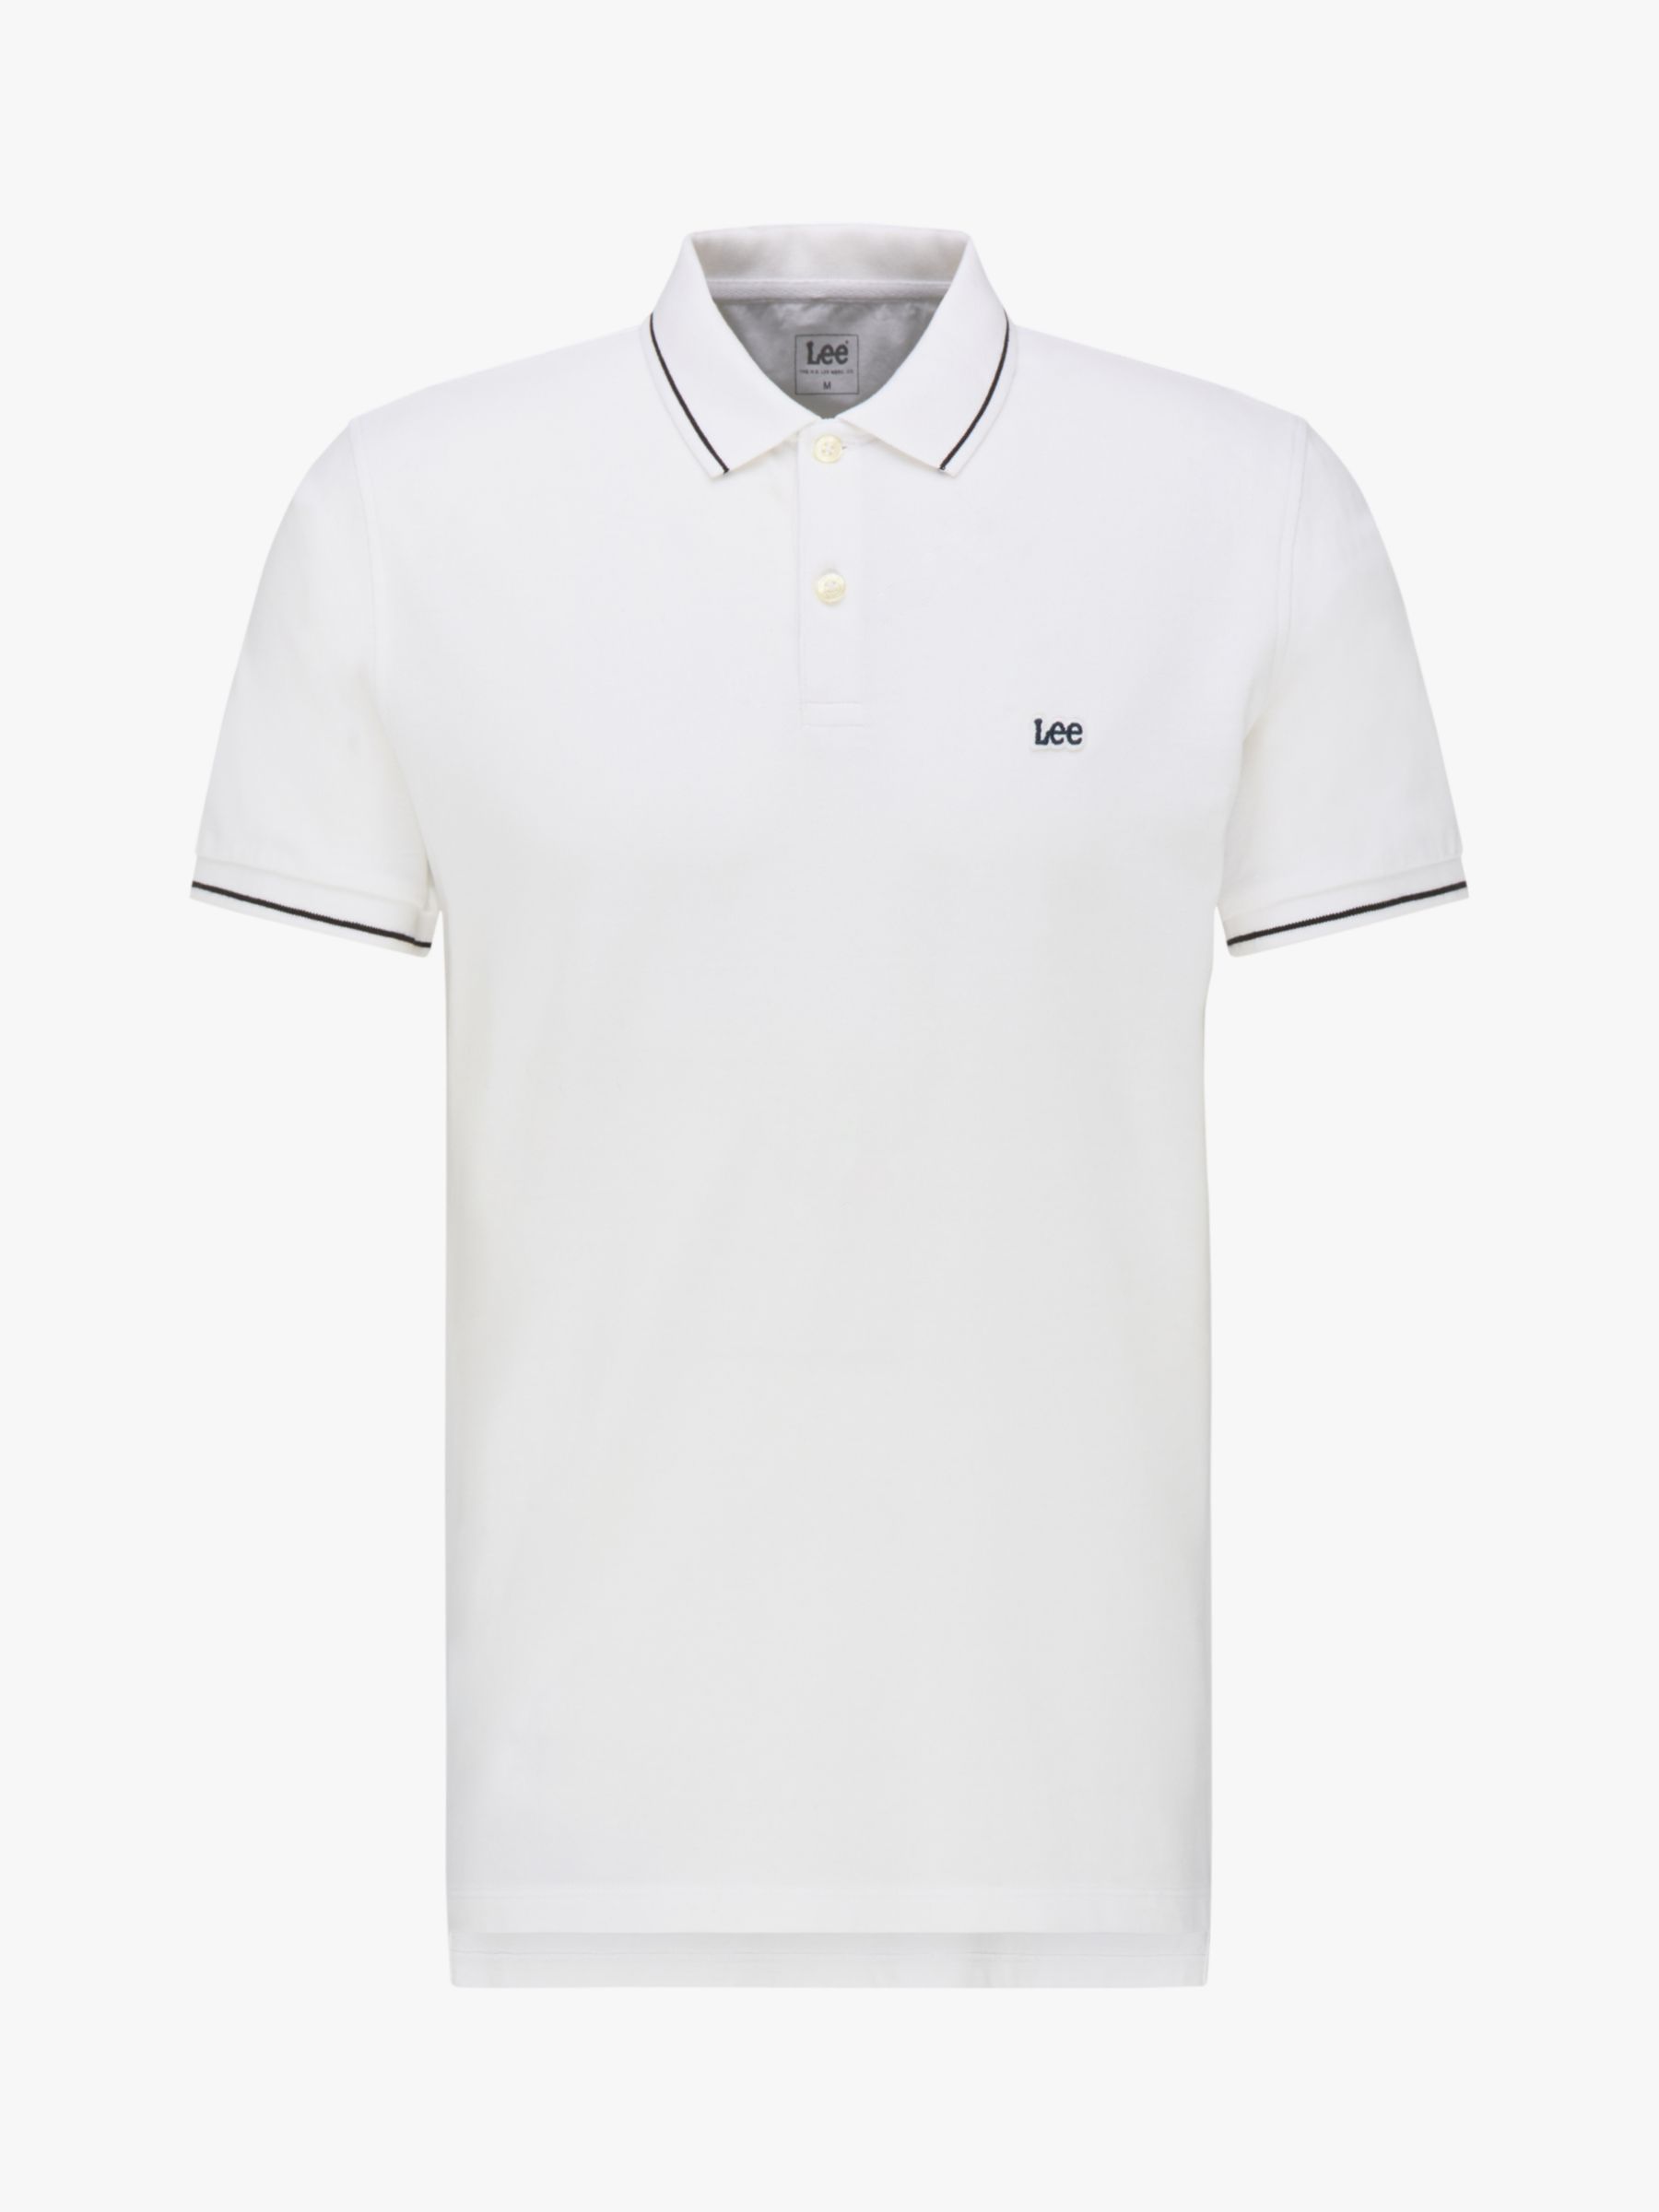 Lee Short Sleeve Polo Top, Bright White at John Lewis & Partners